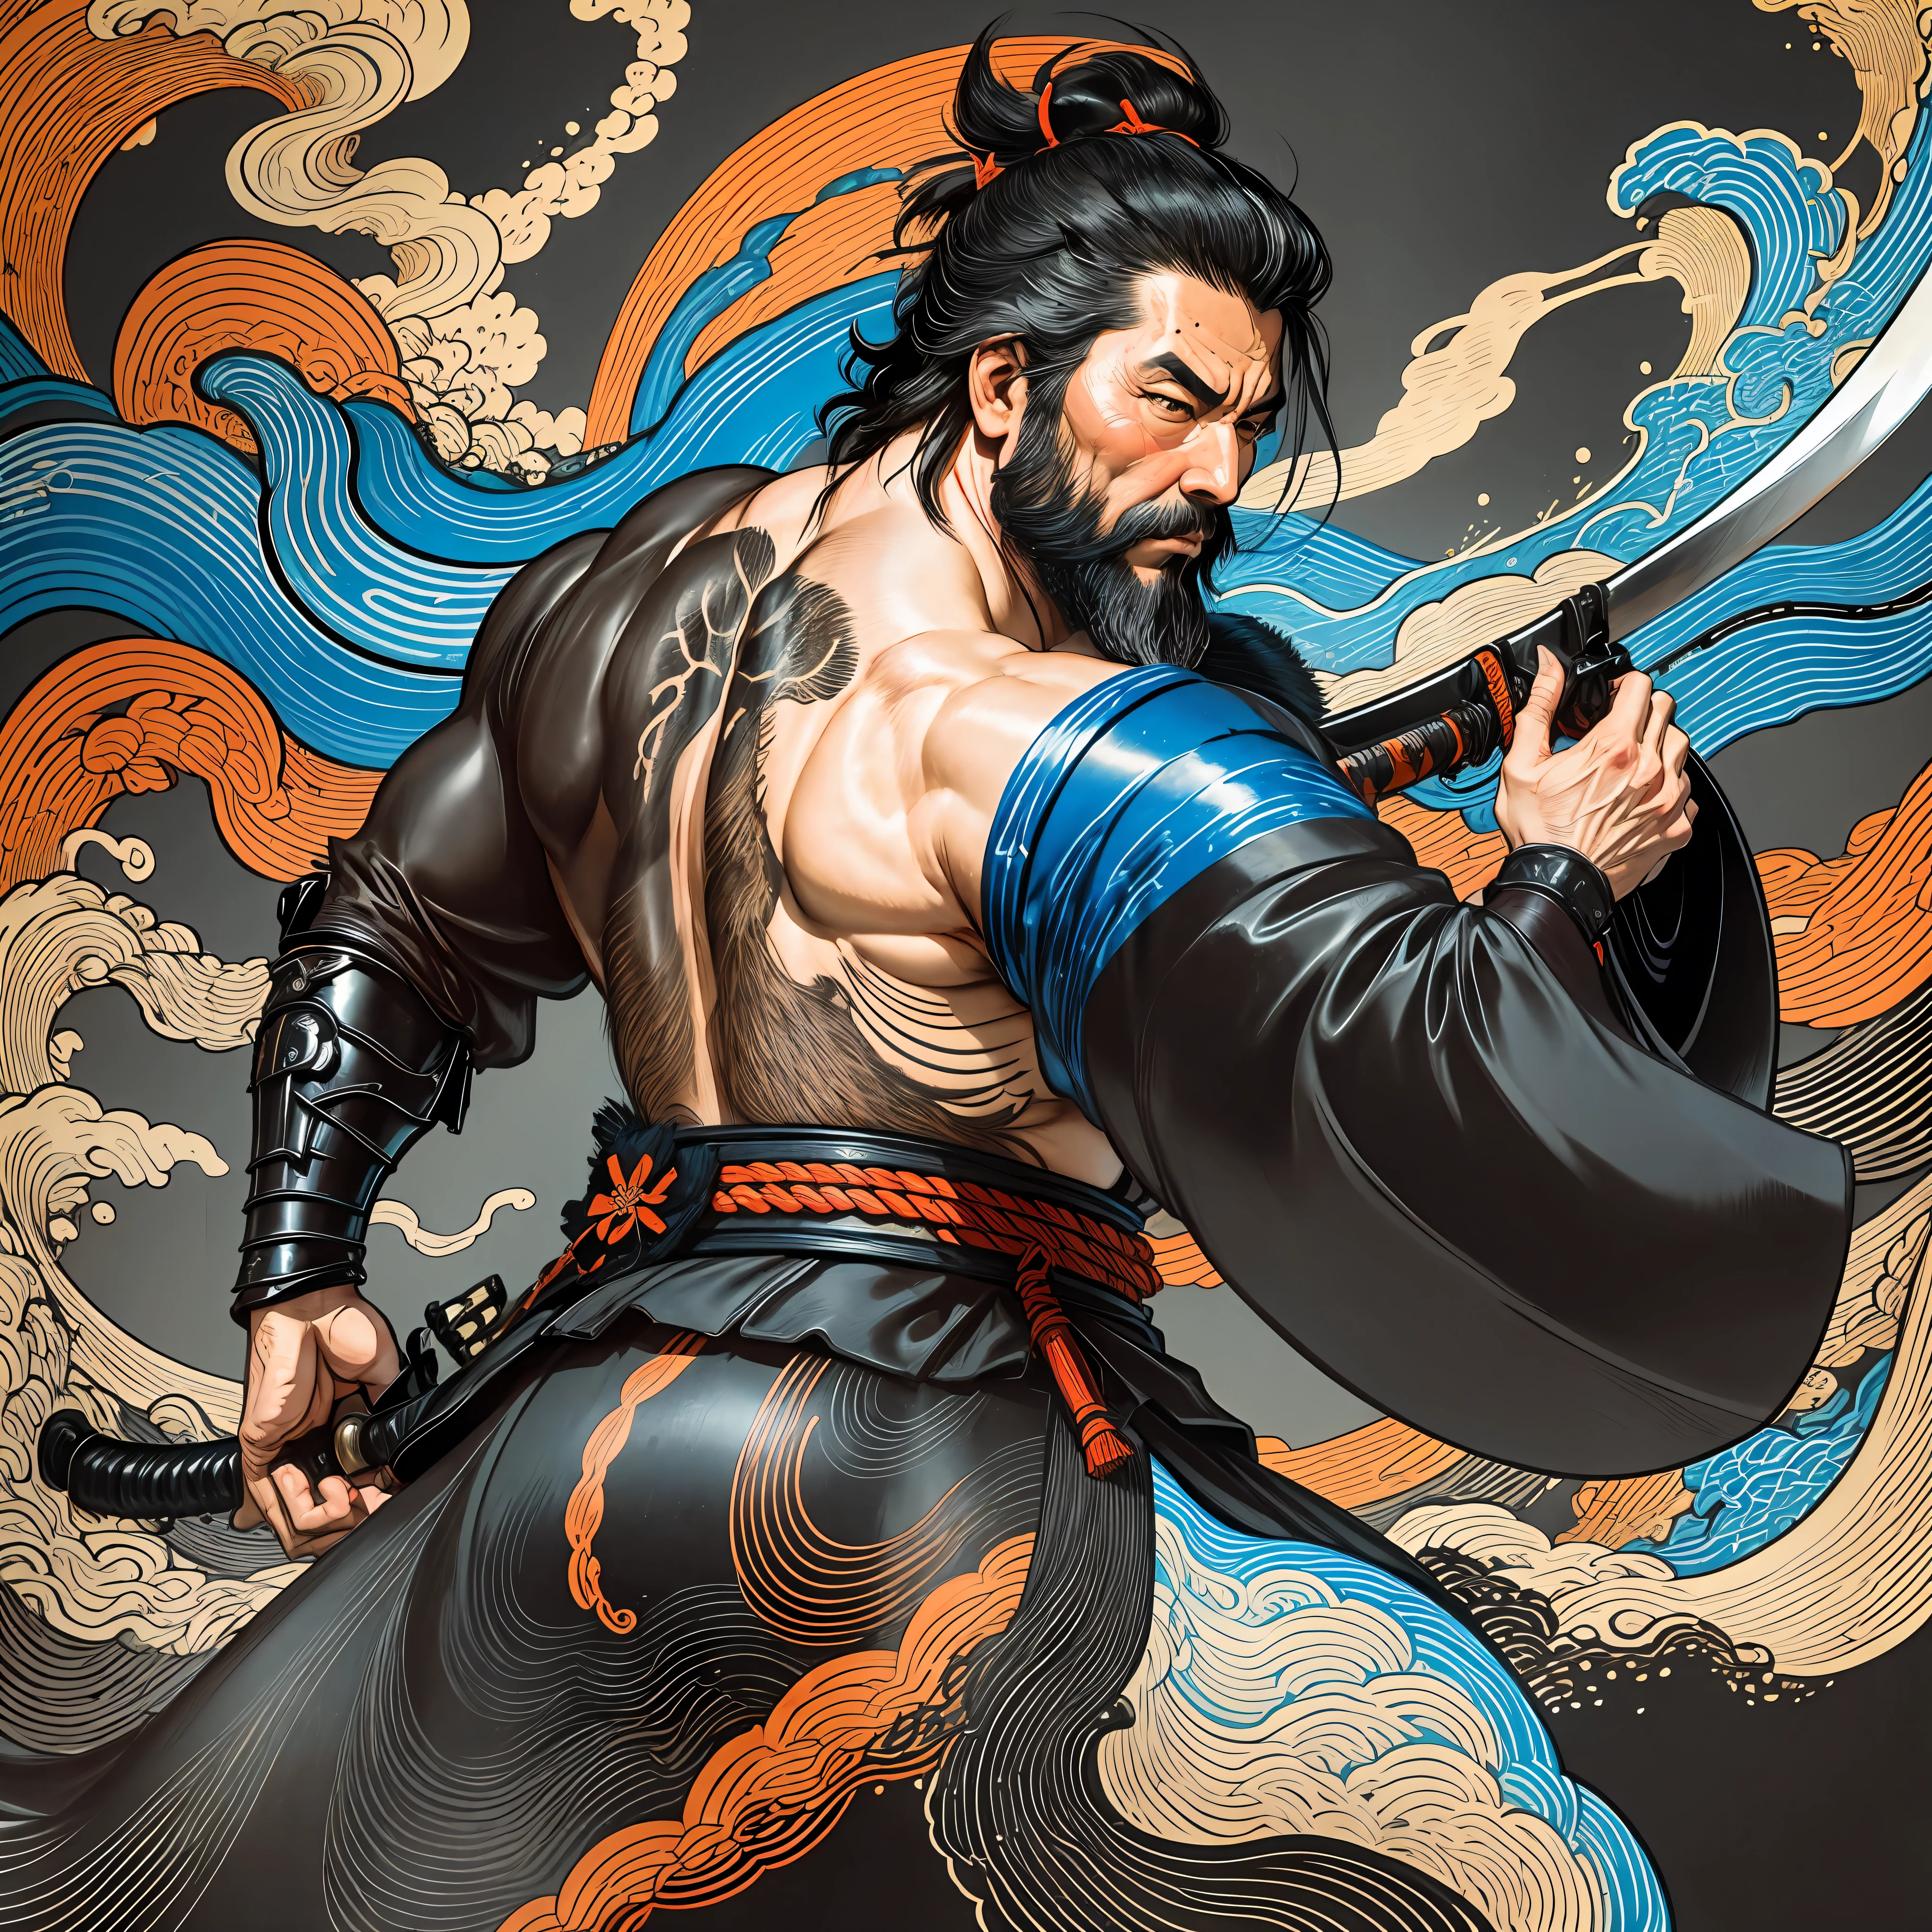 It is a full-body painting with natural colors with Katsushika Hokusai-style line drawings. The swordsman Miyamoto Musashi has a big body like a strongman. Samurai of Japan. He has a dignified yet manly expression of determination, short black hair, and a short, trimmed beard. His upper body is covered in a black kimono and his hakama is knee-long. In his right hand he holds a Japan sword with a longer sword part. In the highest quality, in the high-resolution ukiyo-e style lightning and swirling flames of the masterpiece. Miyamoto Musashi stands with his face and body facing forward, his back straight.